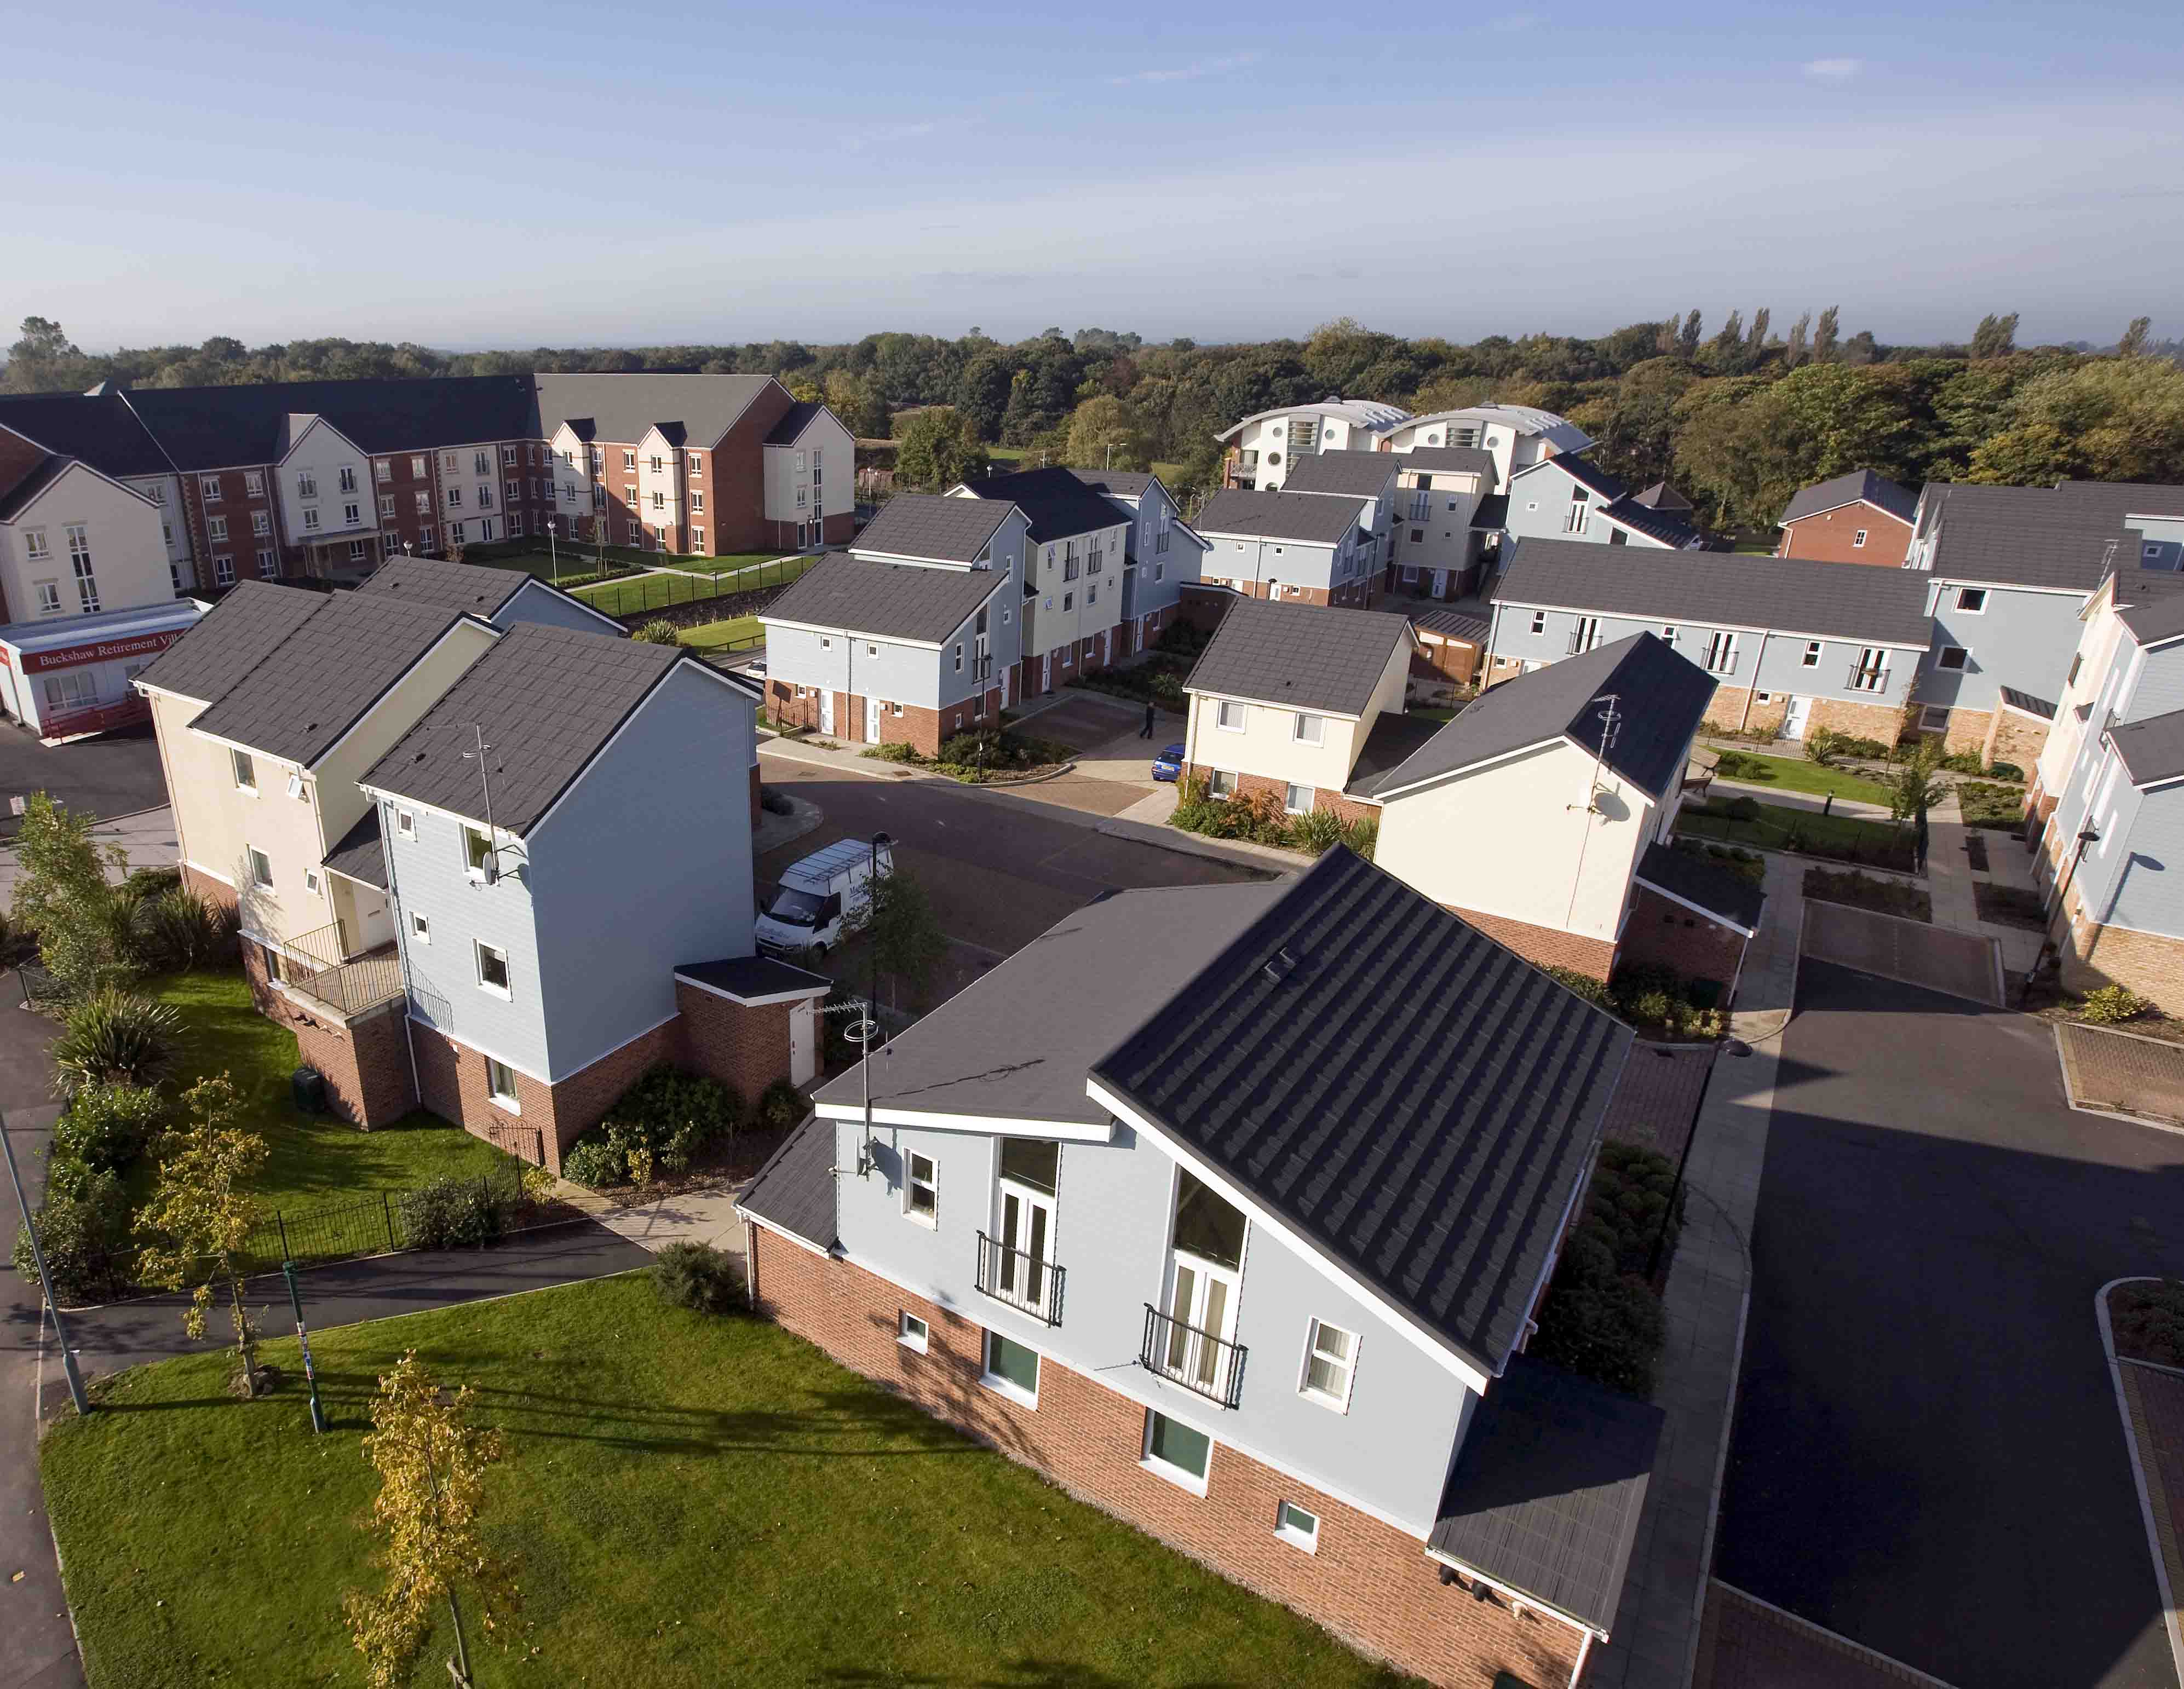 Metrotile Lightweight Roofing Slate in Charcoal on New Build Redrow Homes